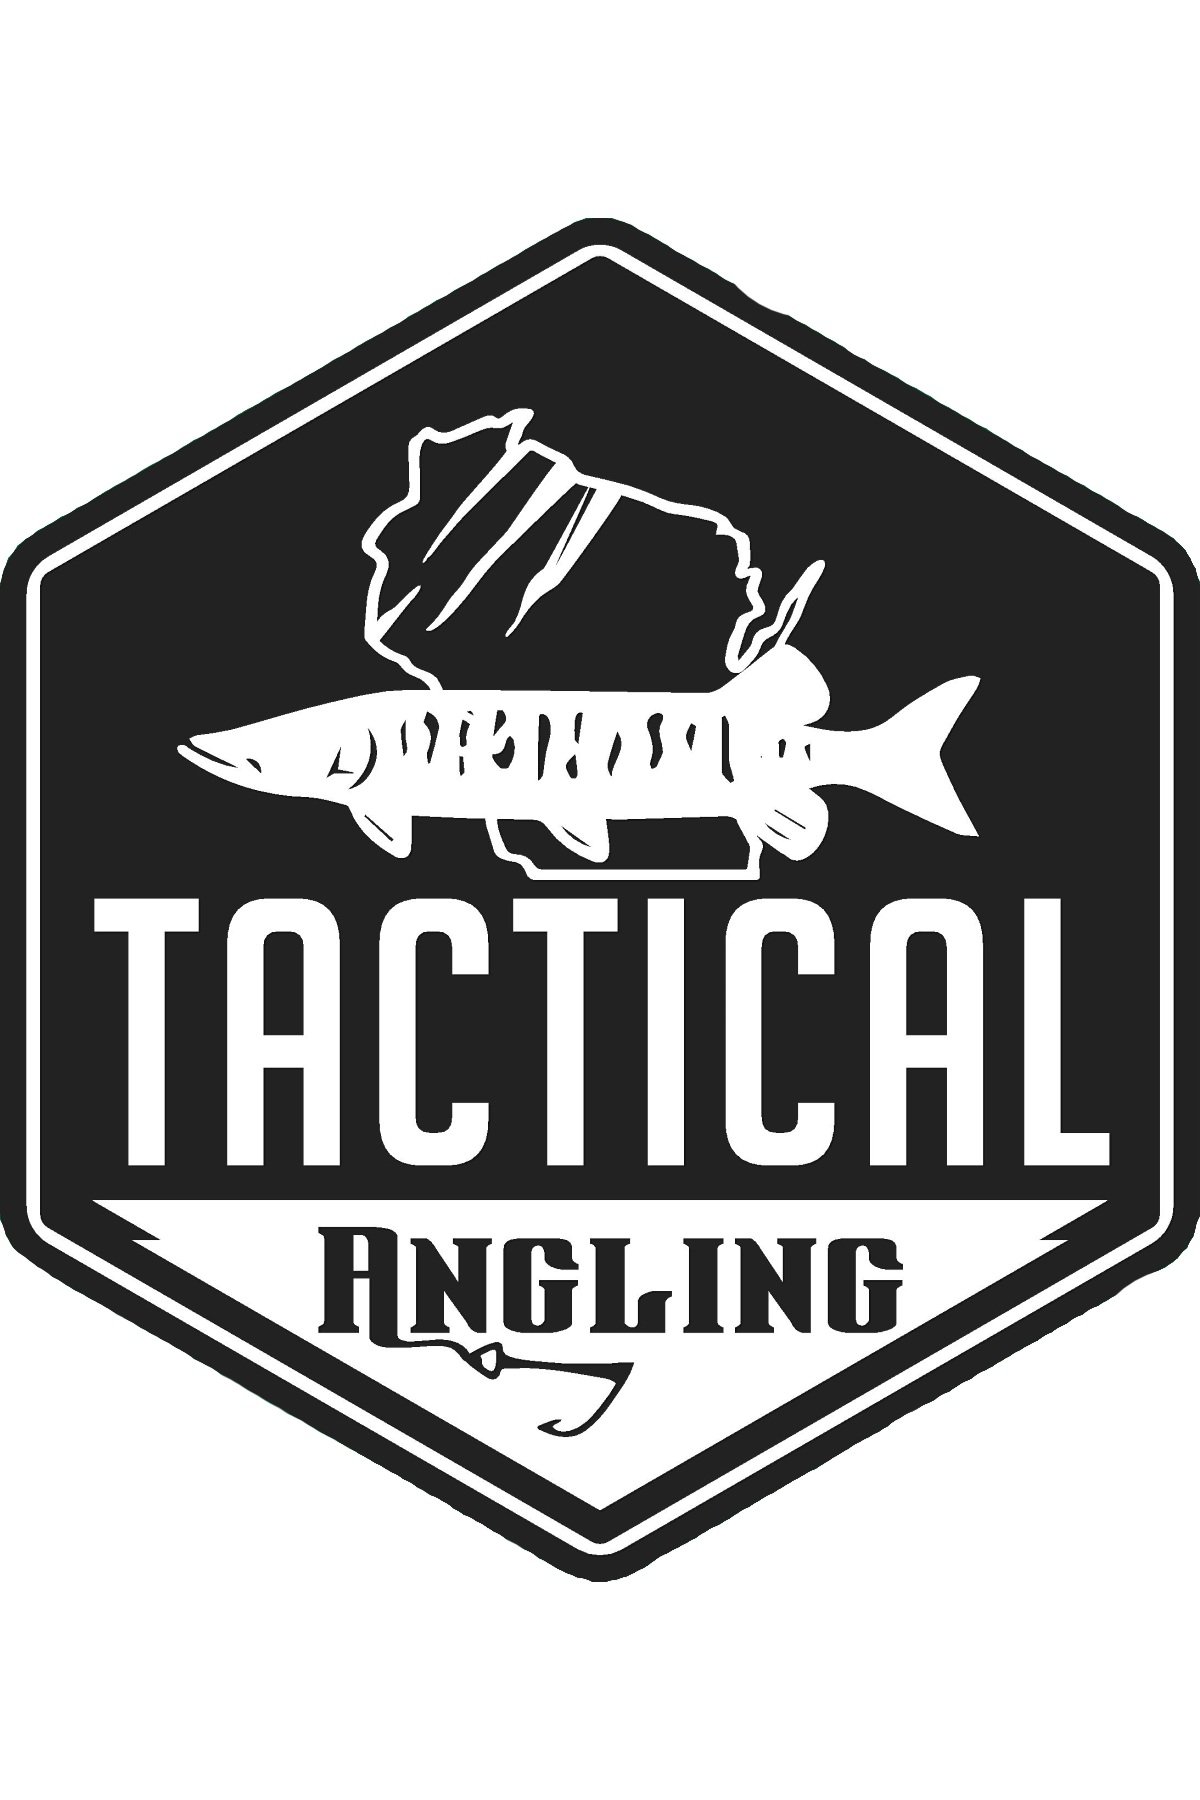 Tactical Angling Guide Service